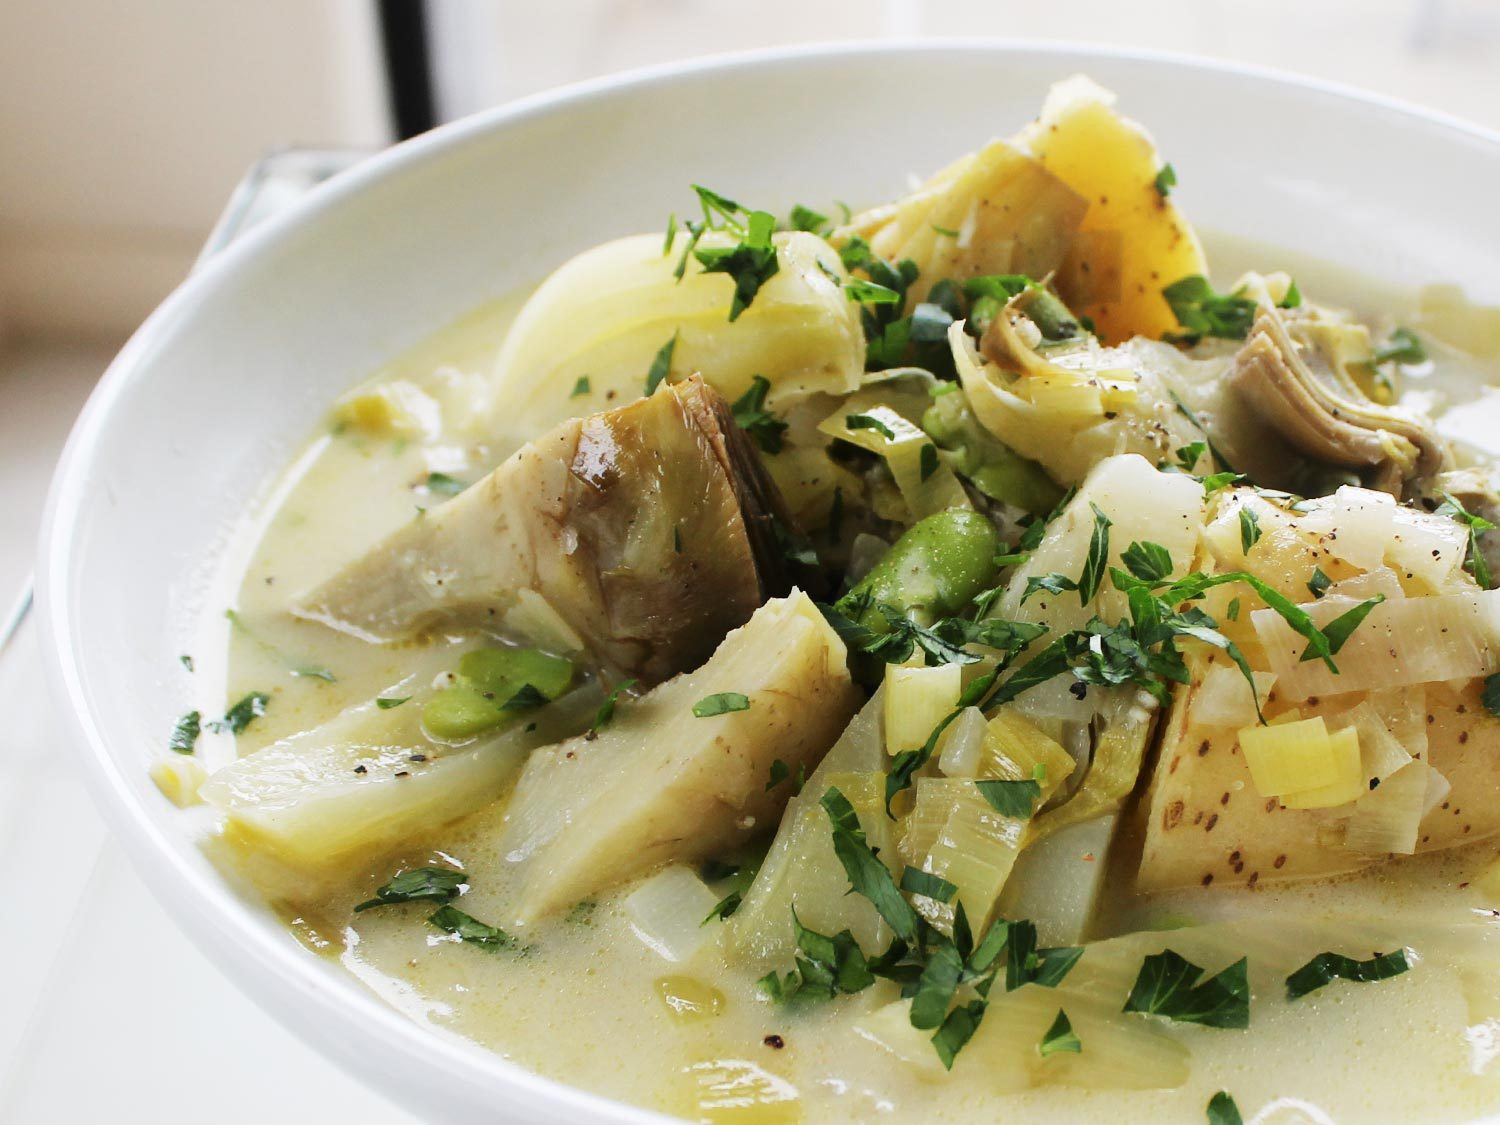 Leek Recipes Vegetarian
 Braised Artichokes With Leeks and Peas From The New